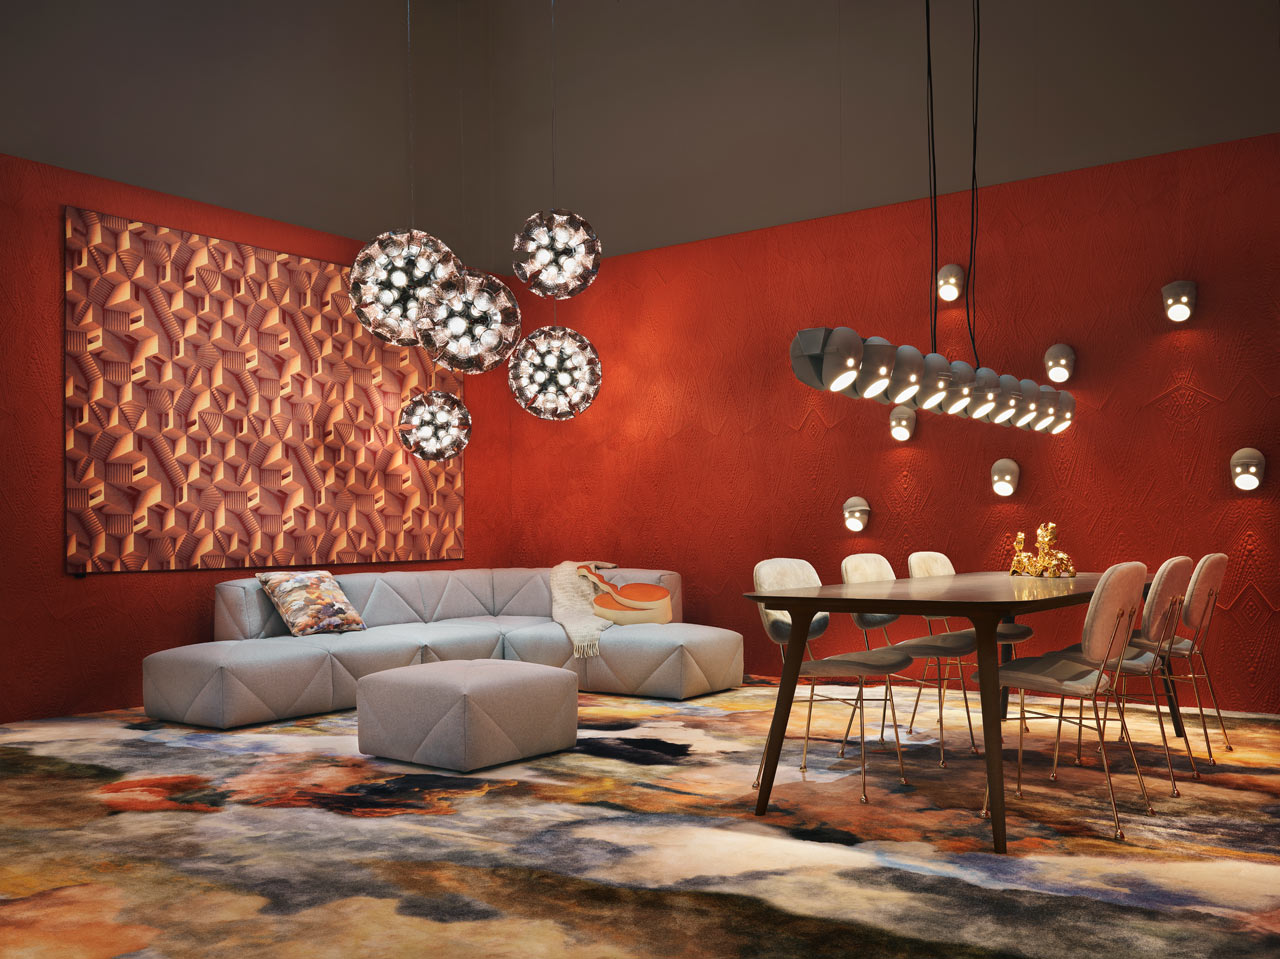 Moooi’s A Life Extraordinary Showcased New Designs at Salone